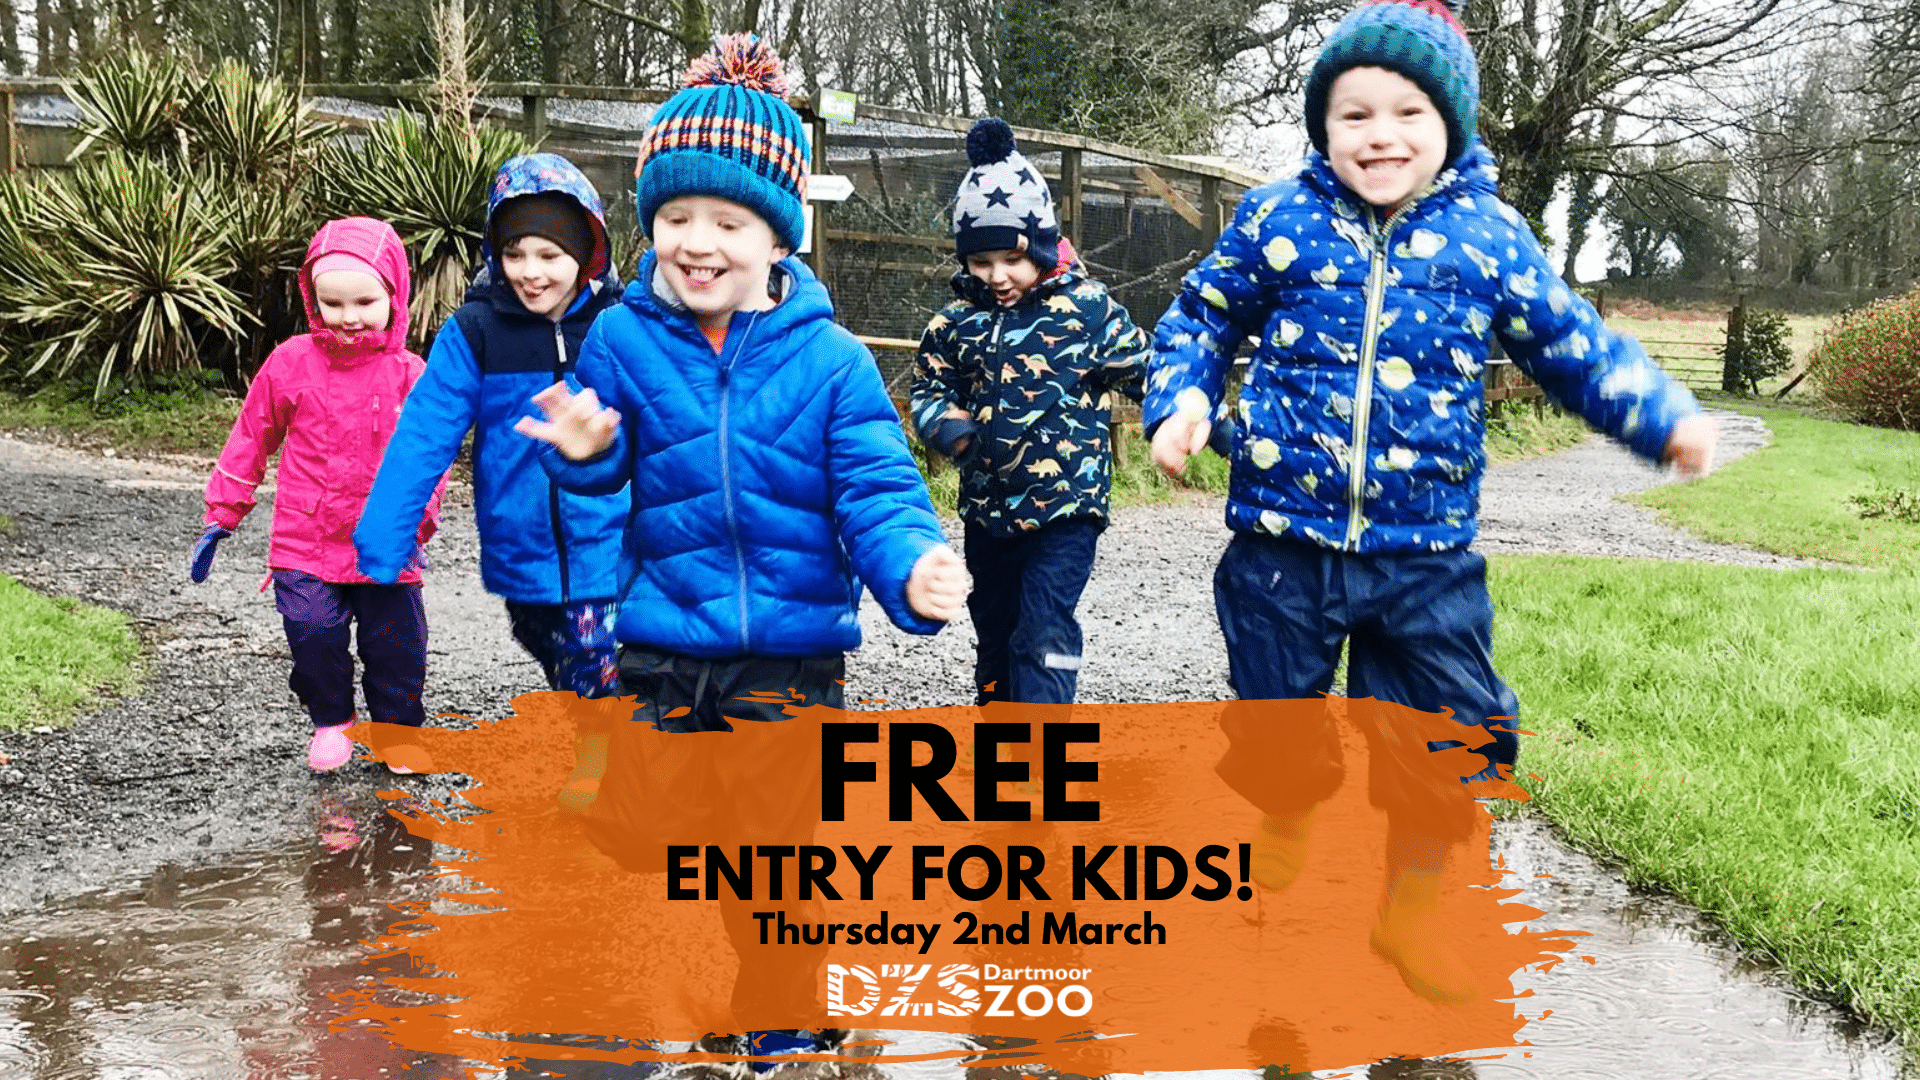 FREE entry for kids – 2nd March!